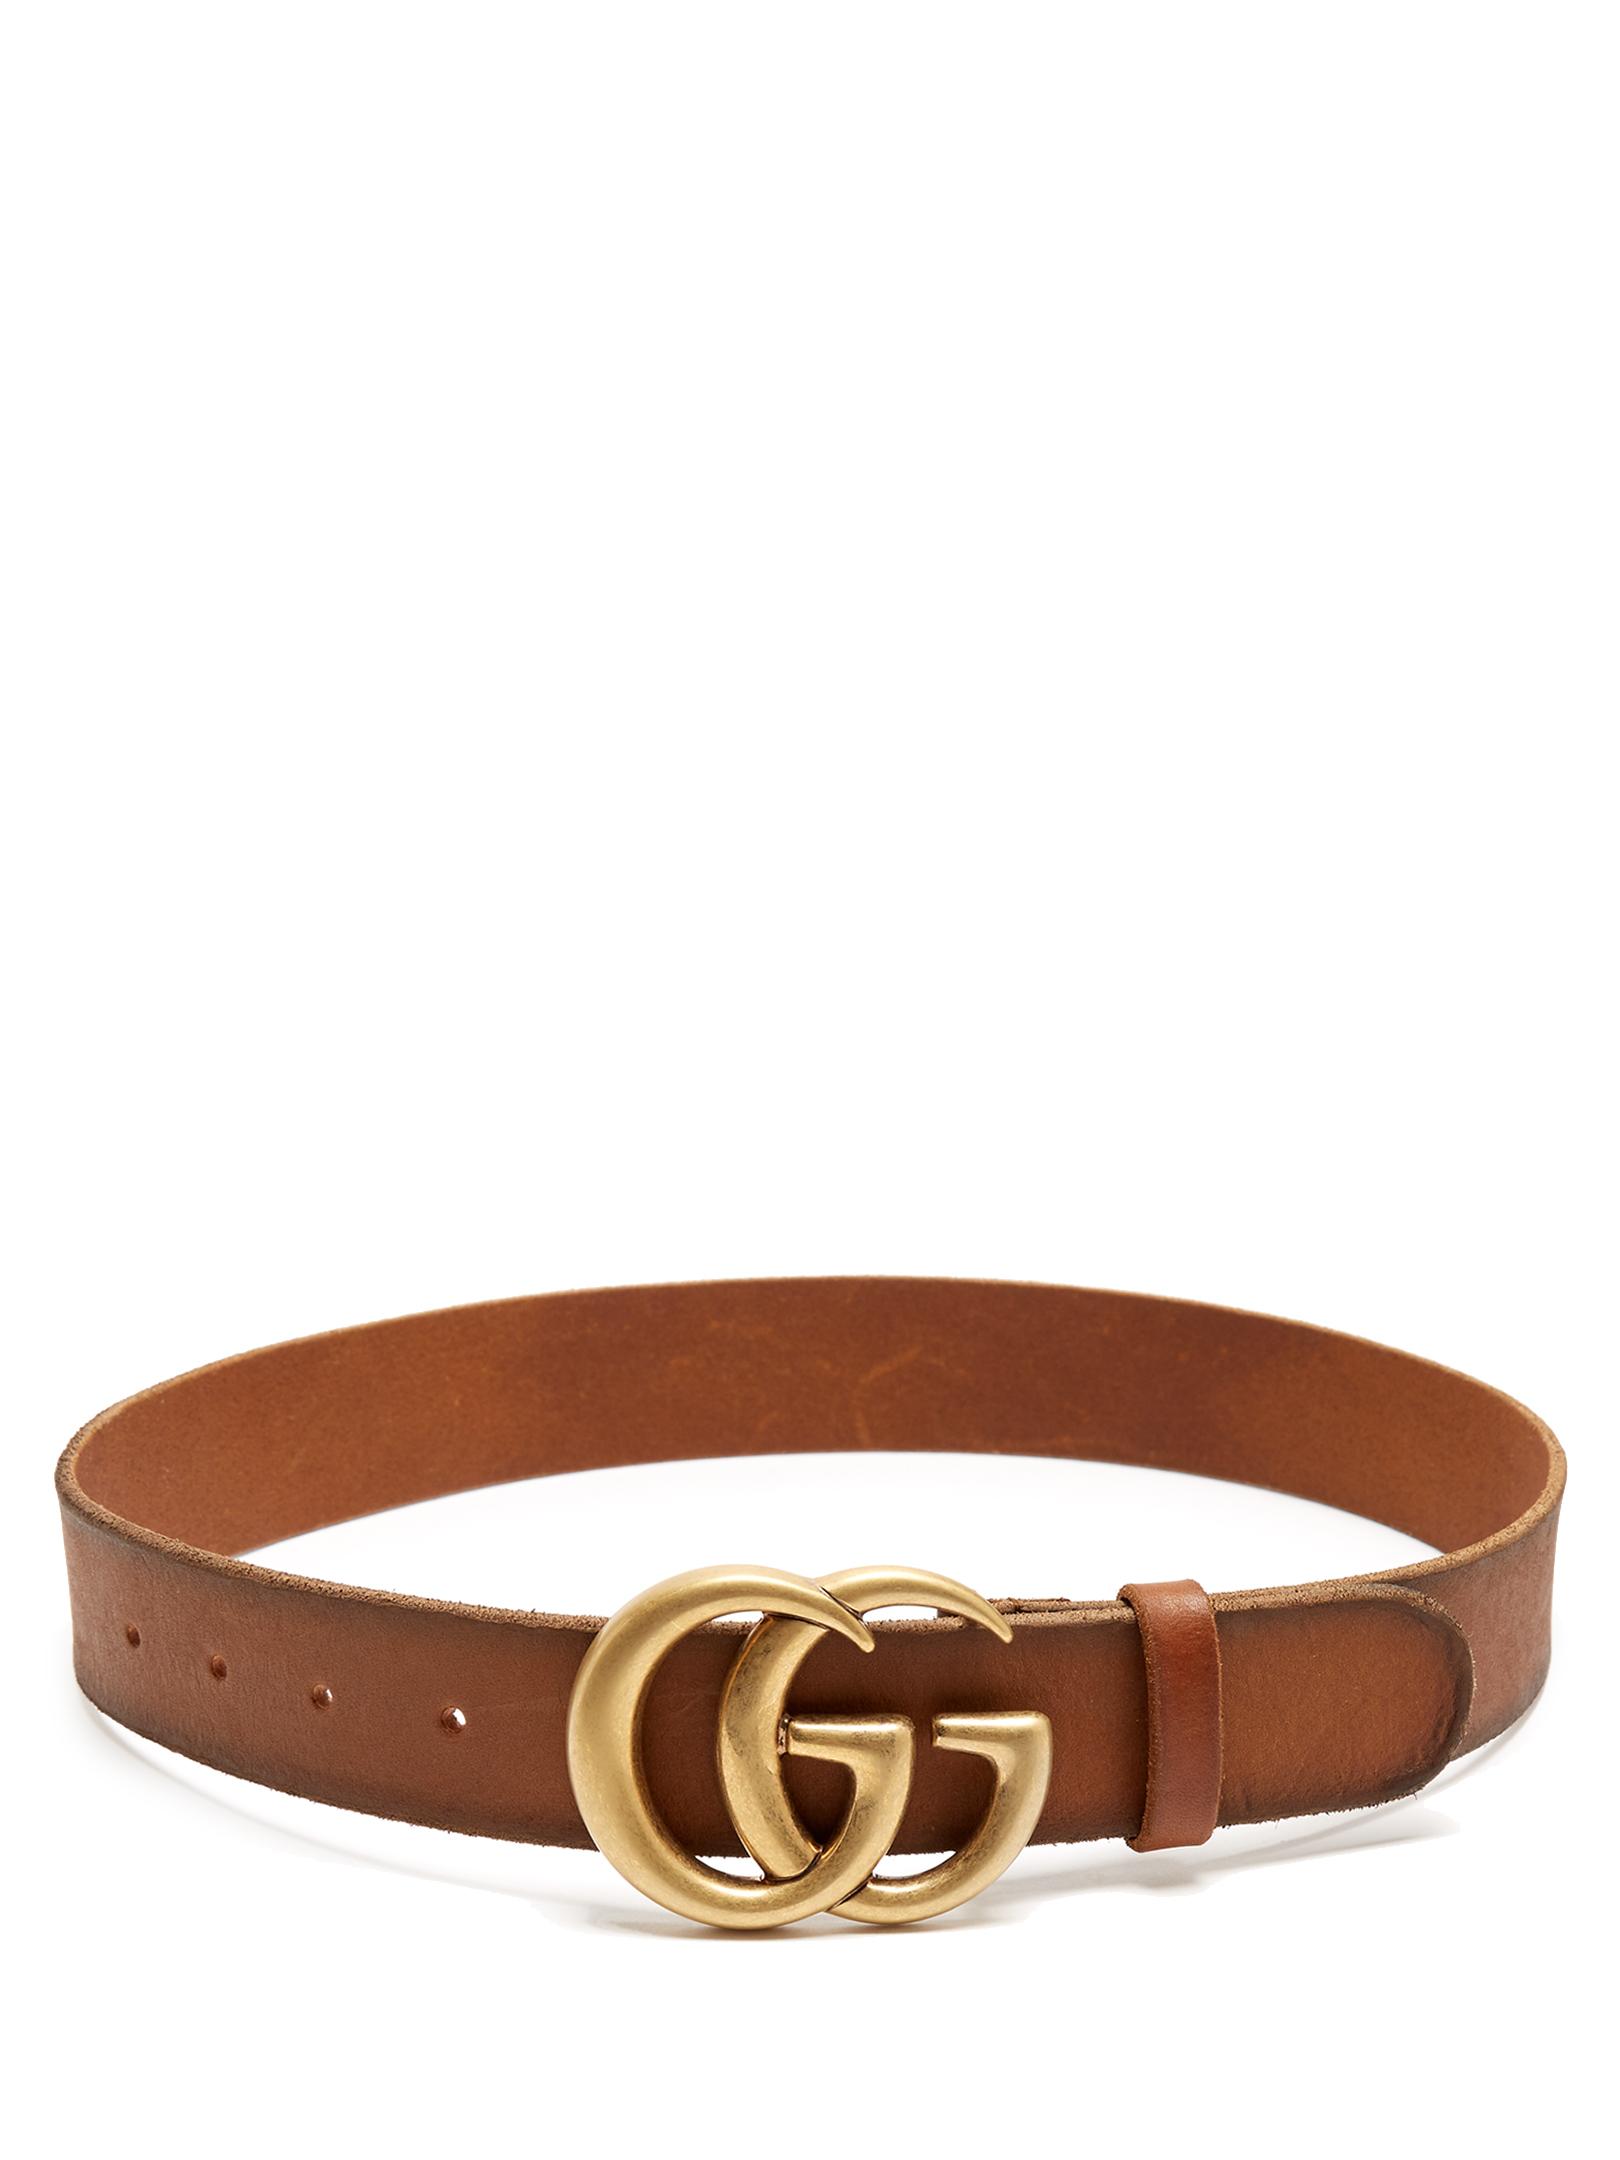 Lyst - Gucci Gg-logo 4cm Leather Belt in Brown